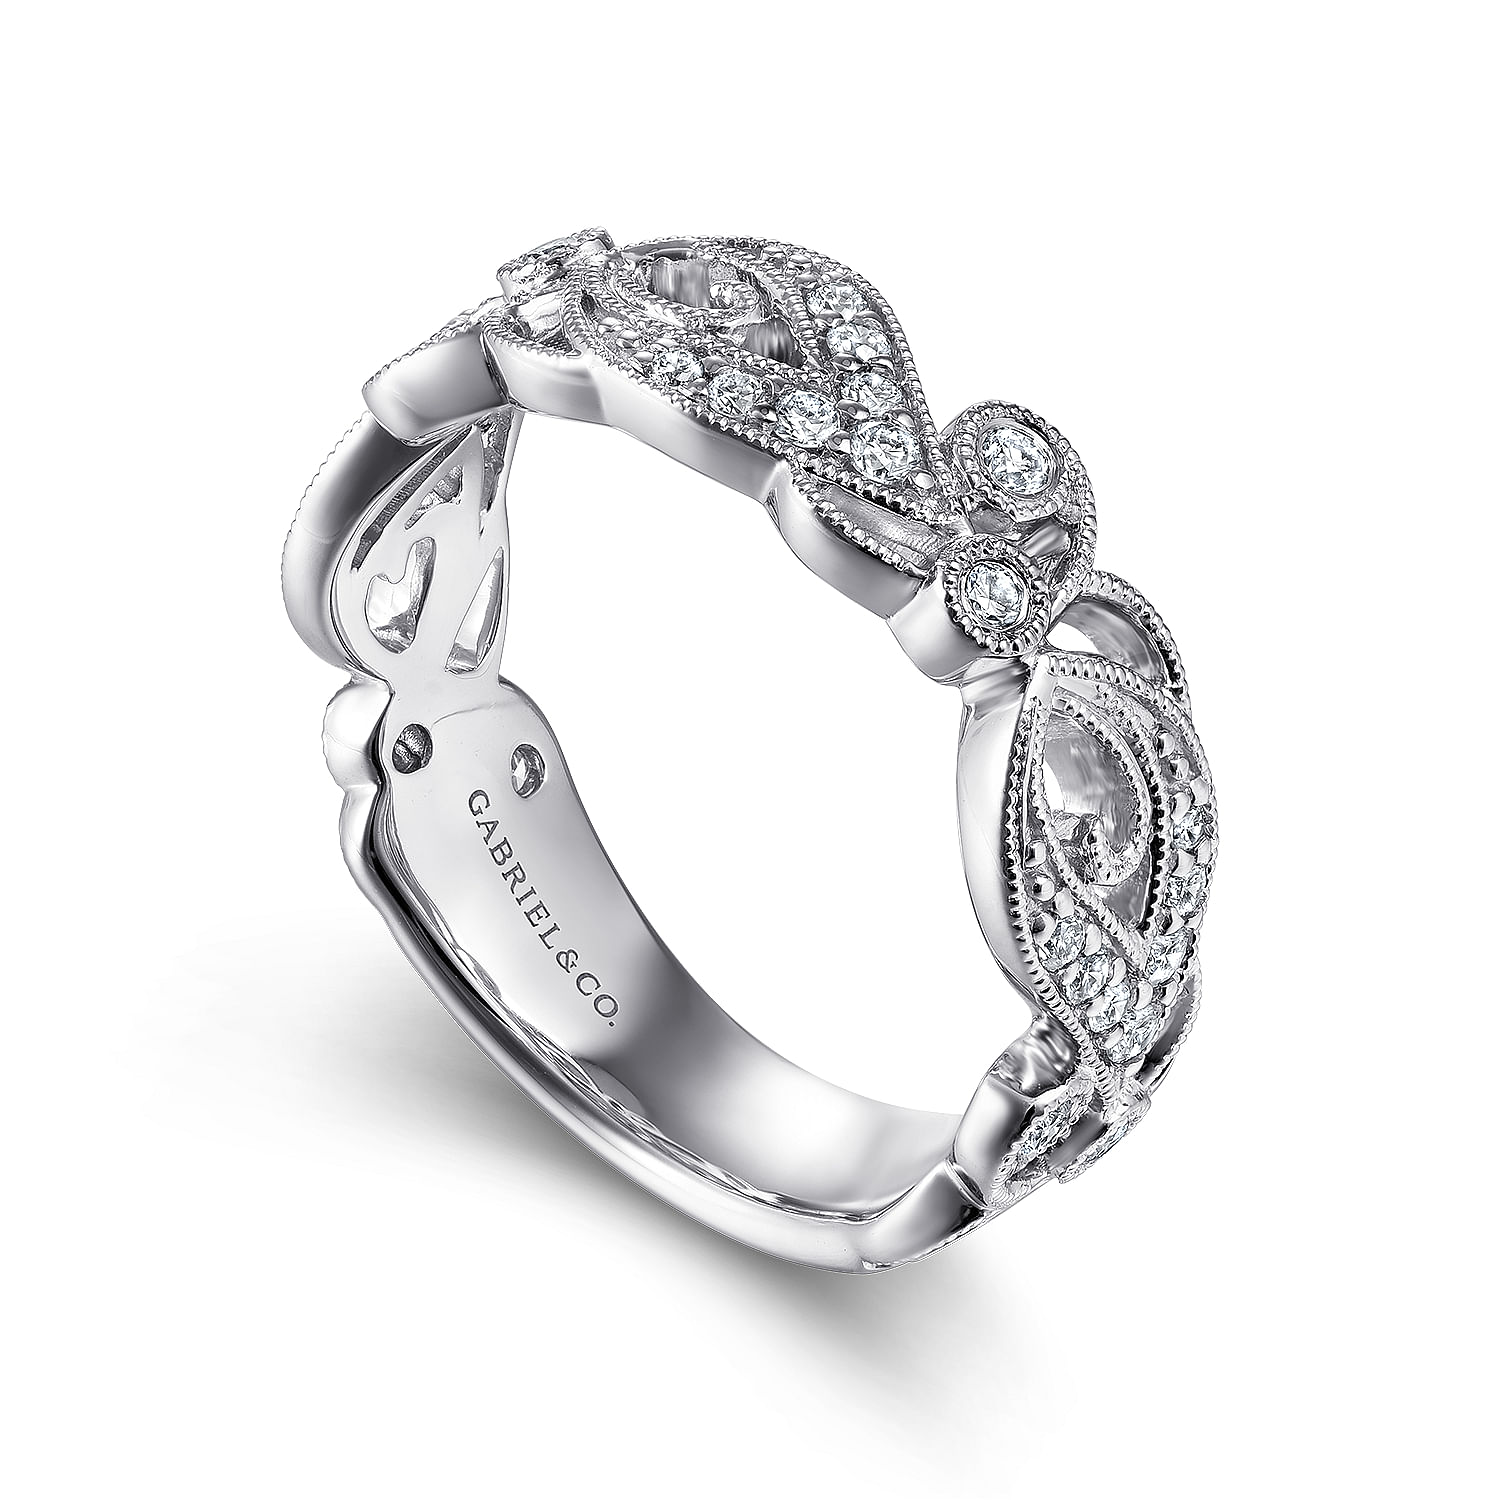 14K White Gold Floral Inspired Diamond Stackable Ring